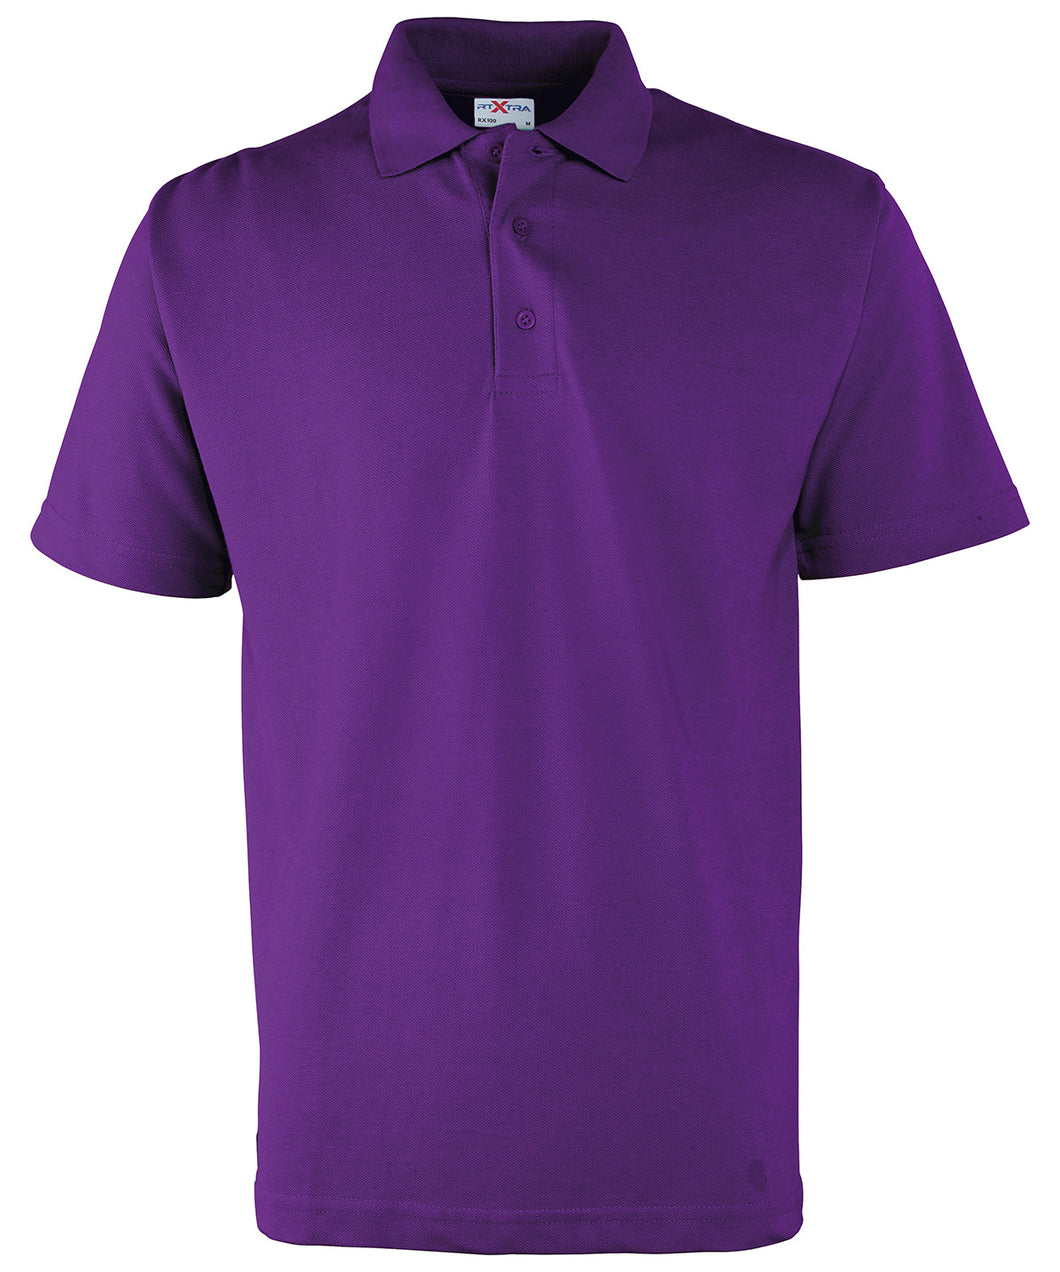 RX100  Classic Polo in purple size large